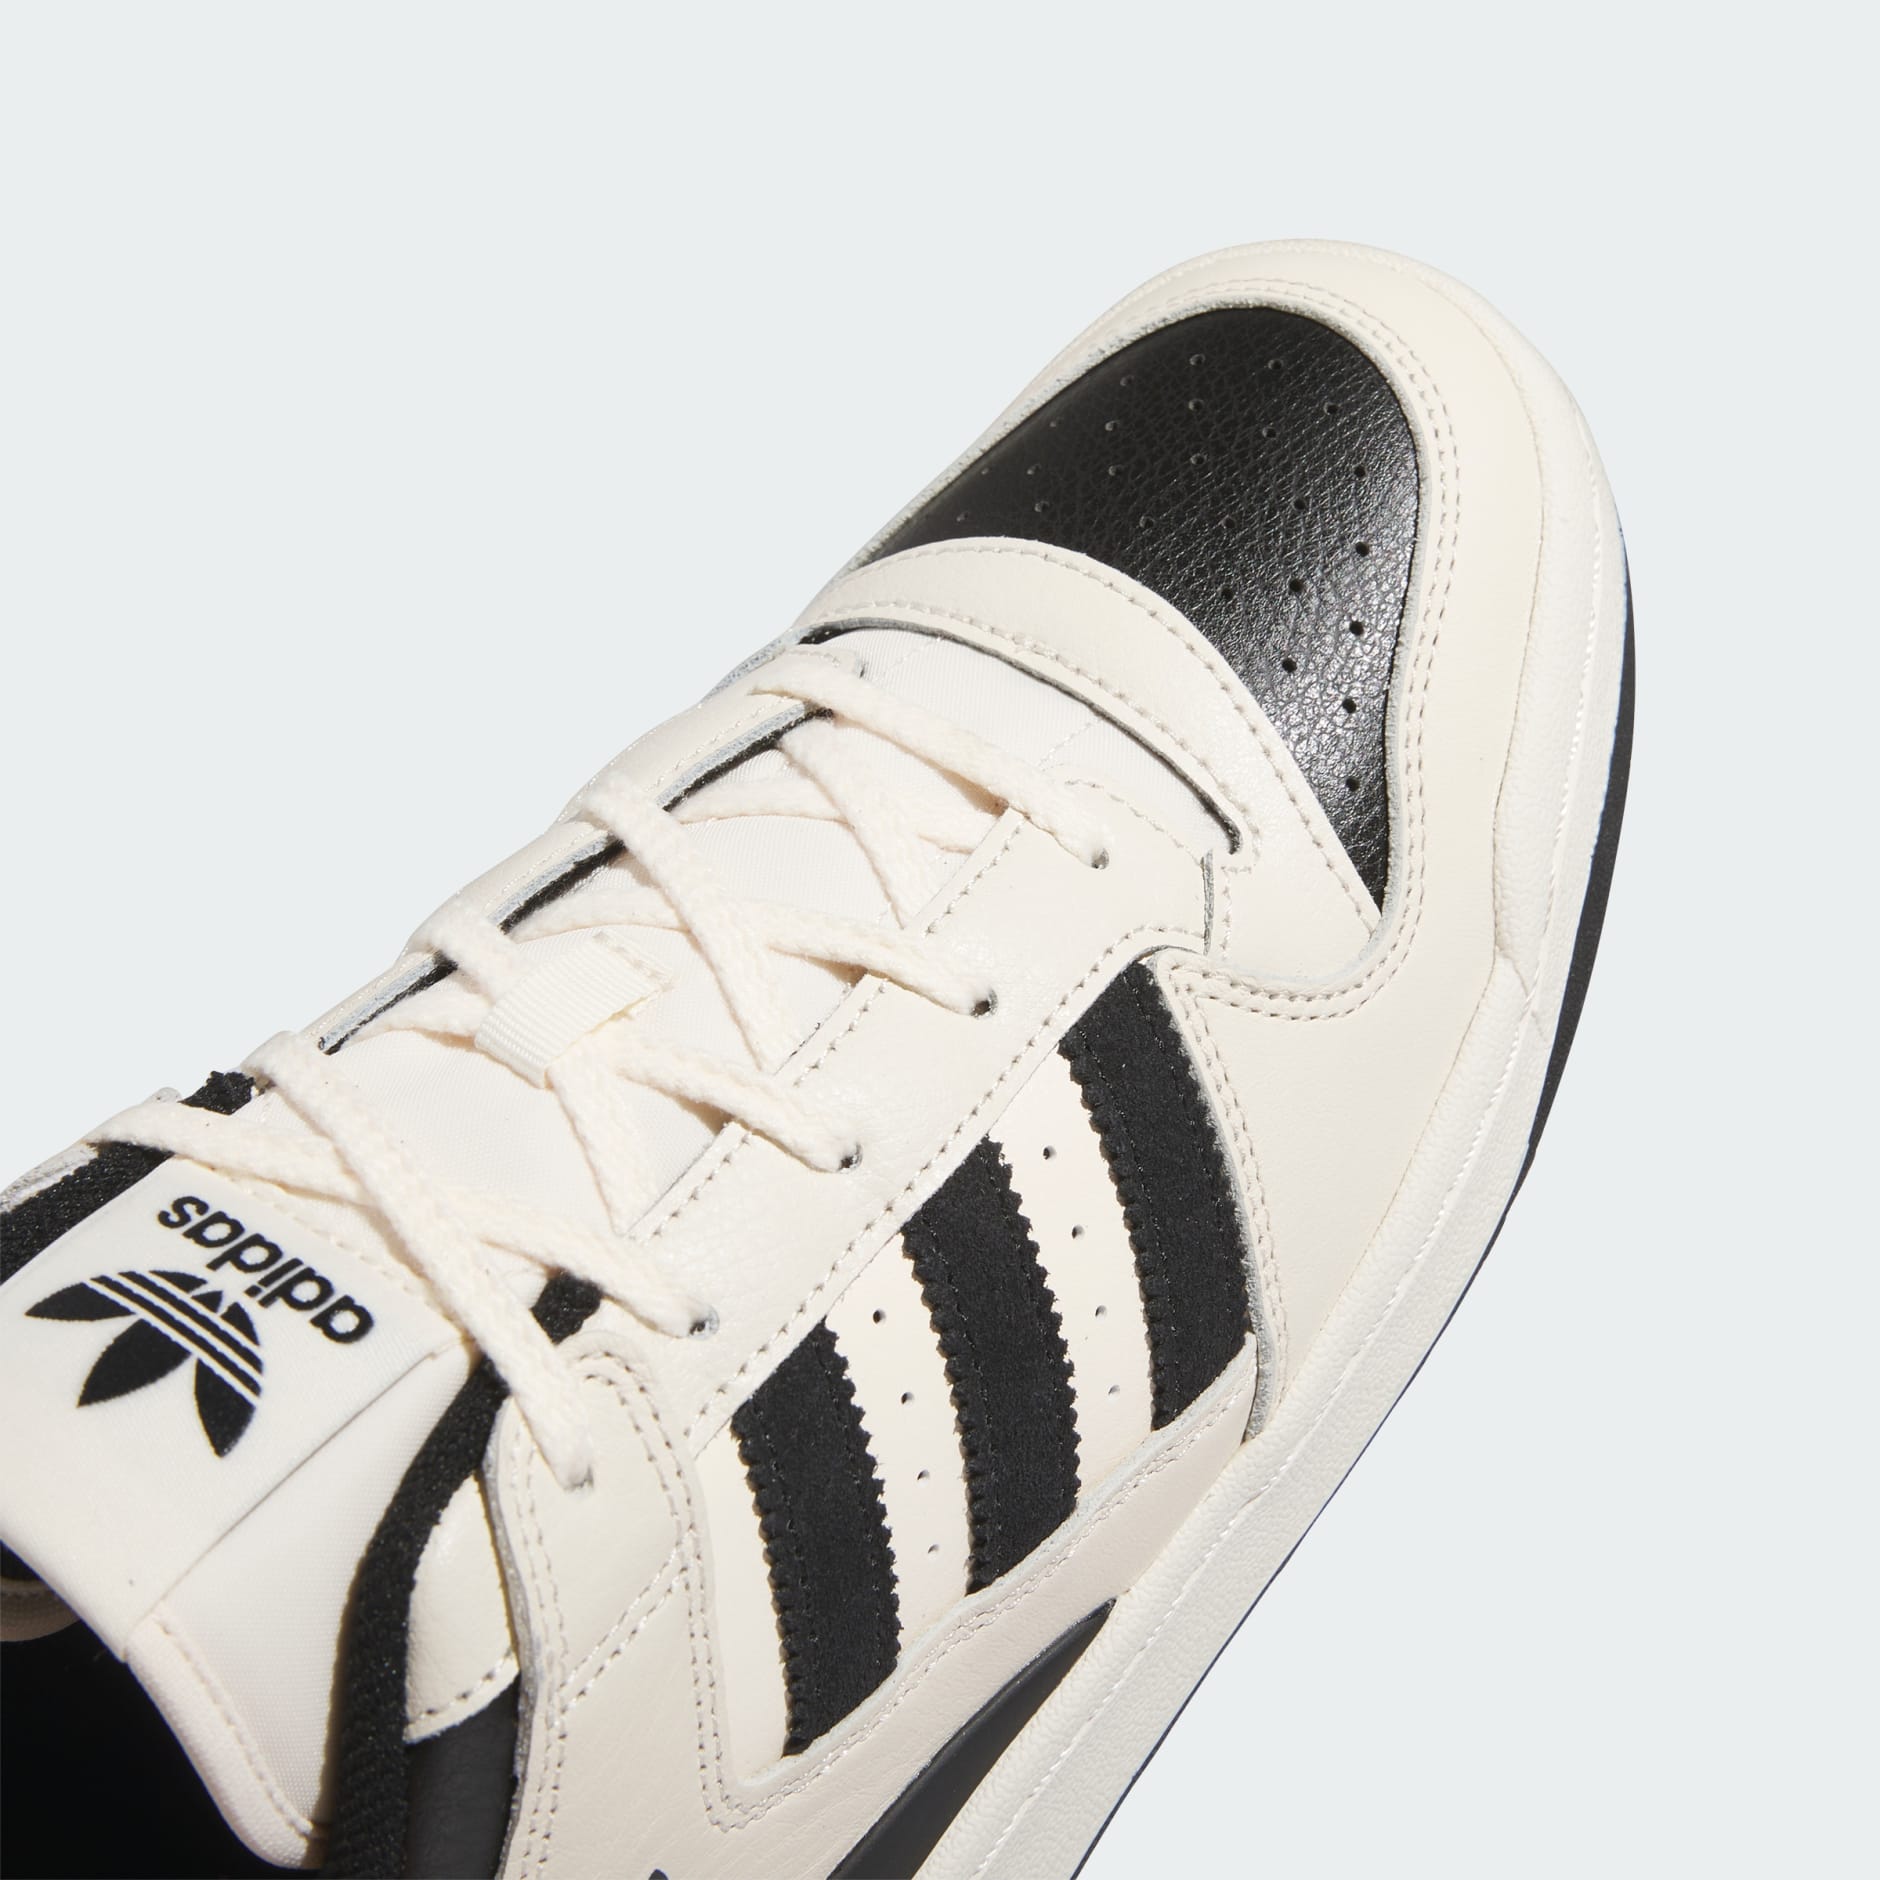 Shoes - Forum Low CL Shoes - White | adidas South Africa